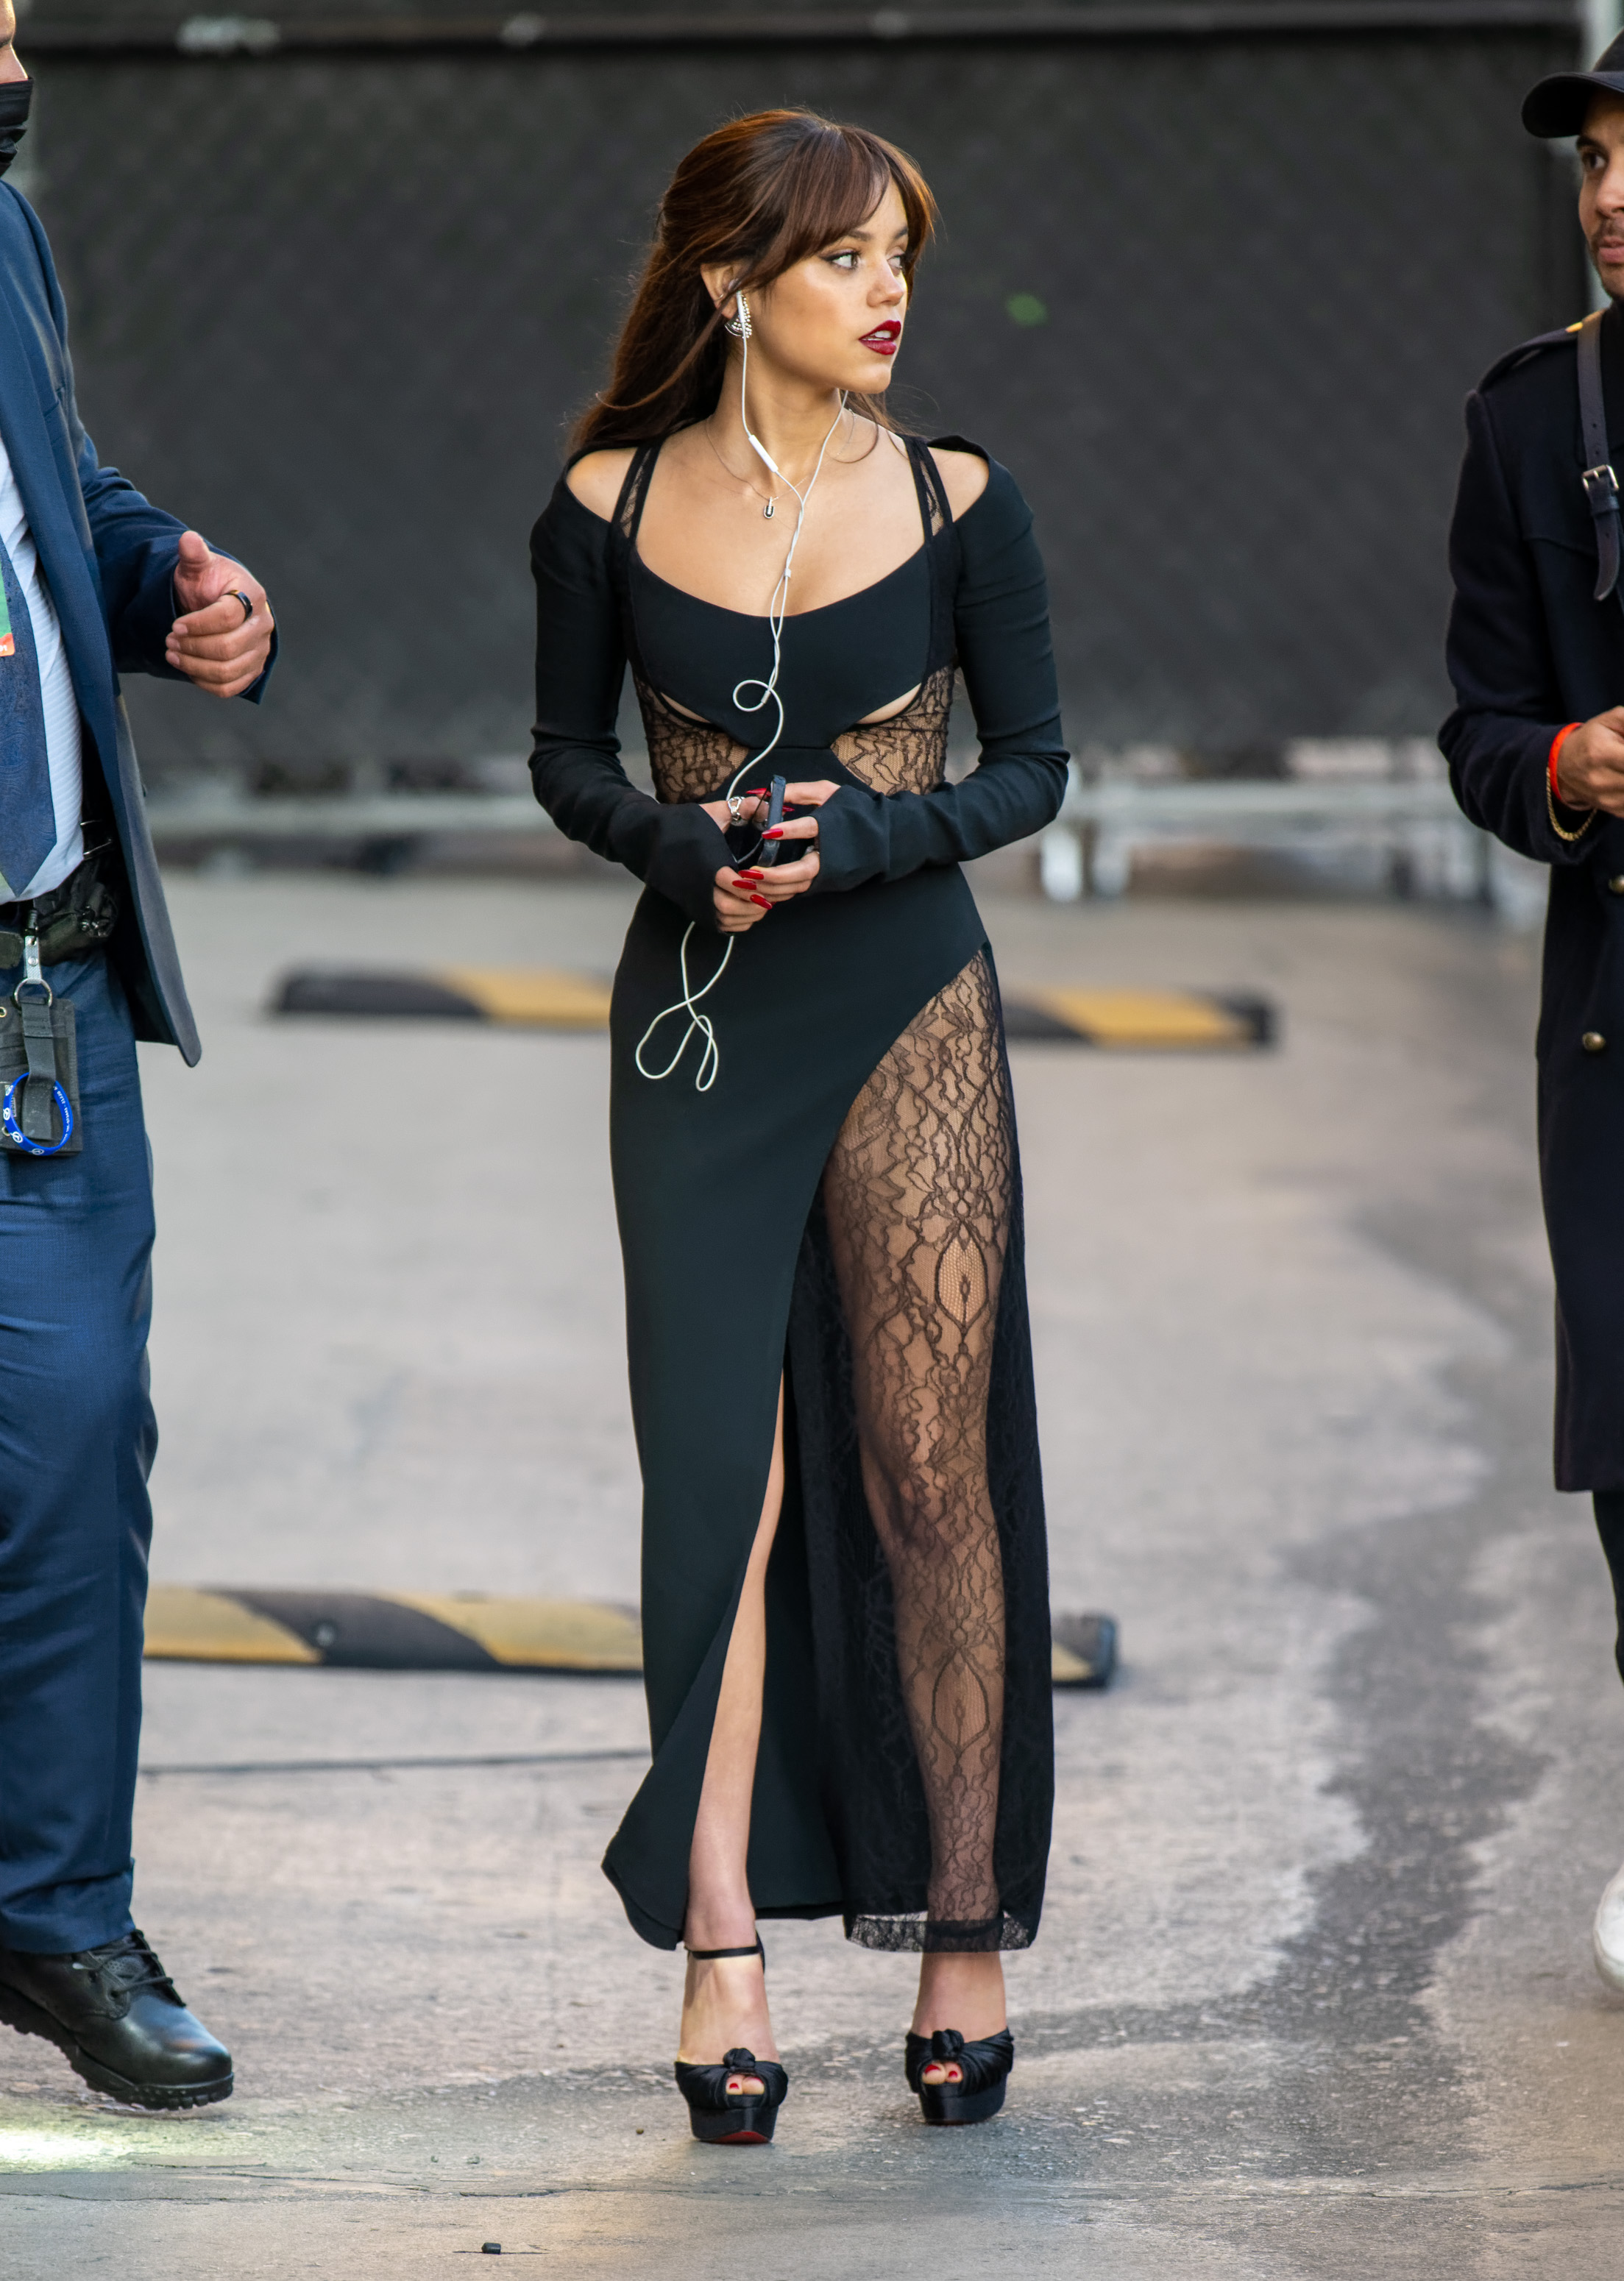 Jenna Ortega Wore A Sheer Lace Dress With A Sky High Slit Who What Wear Uk